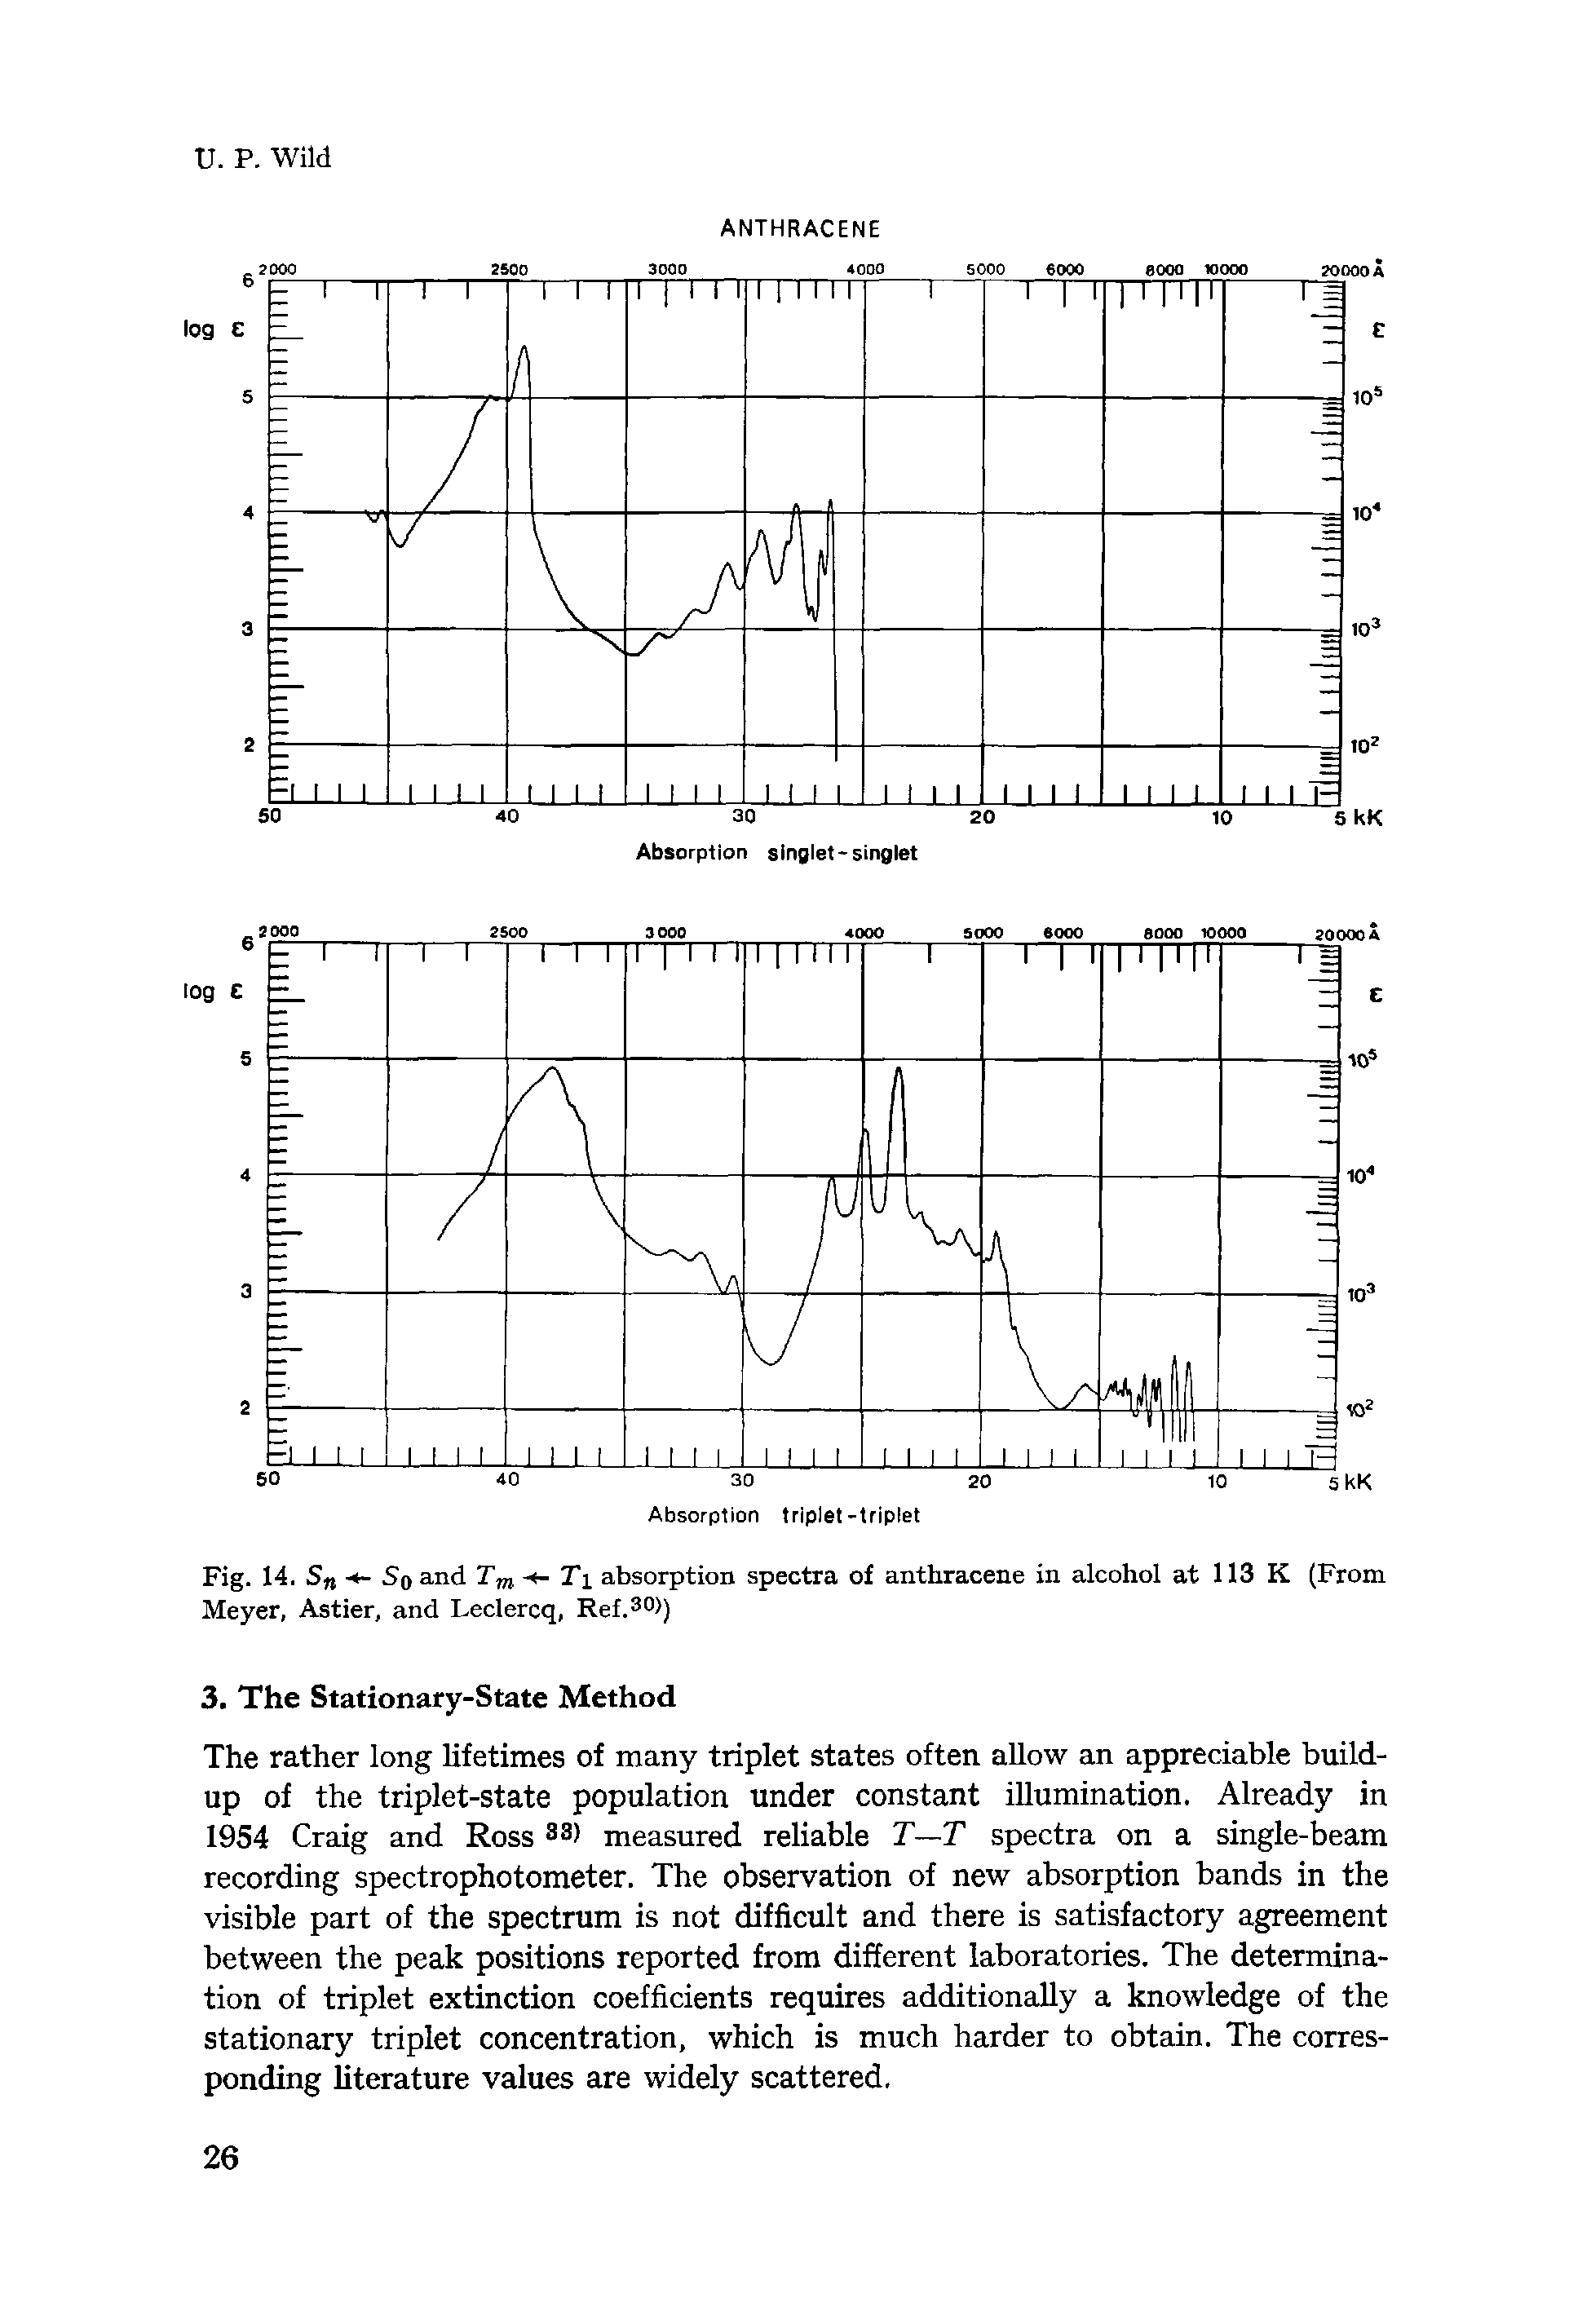 Fig. 14. Sn So and Tm t- Tl absorption spectra of anthracene in alcohol at 113 K (From Meyer, Astier, and Leclercq, Ref. O))...